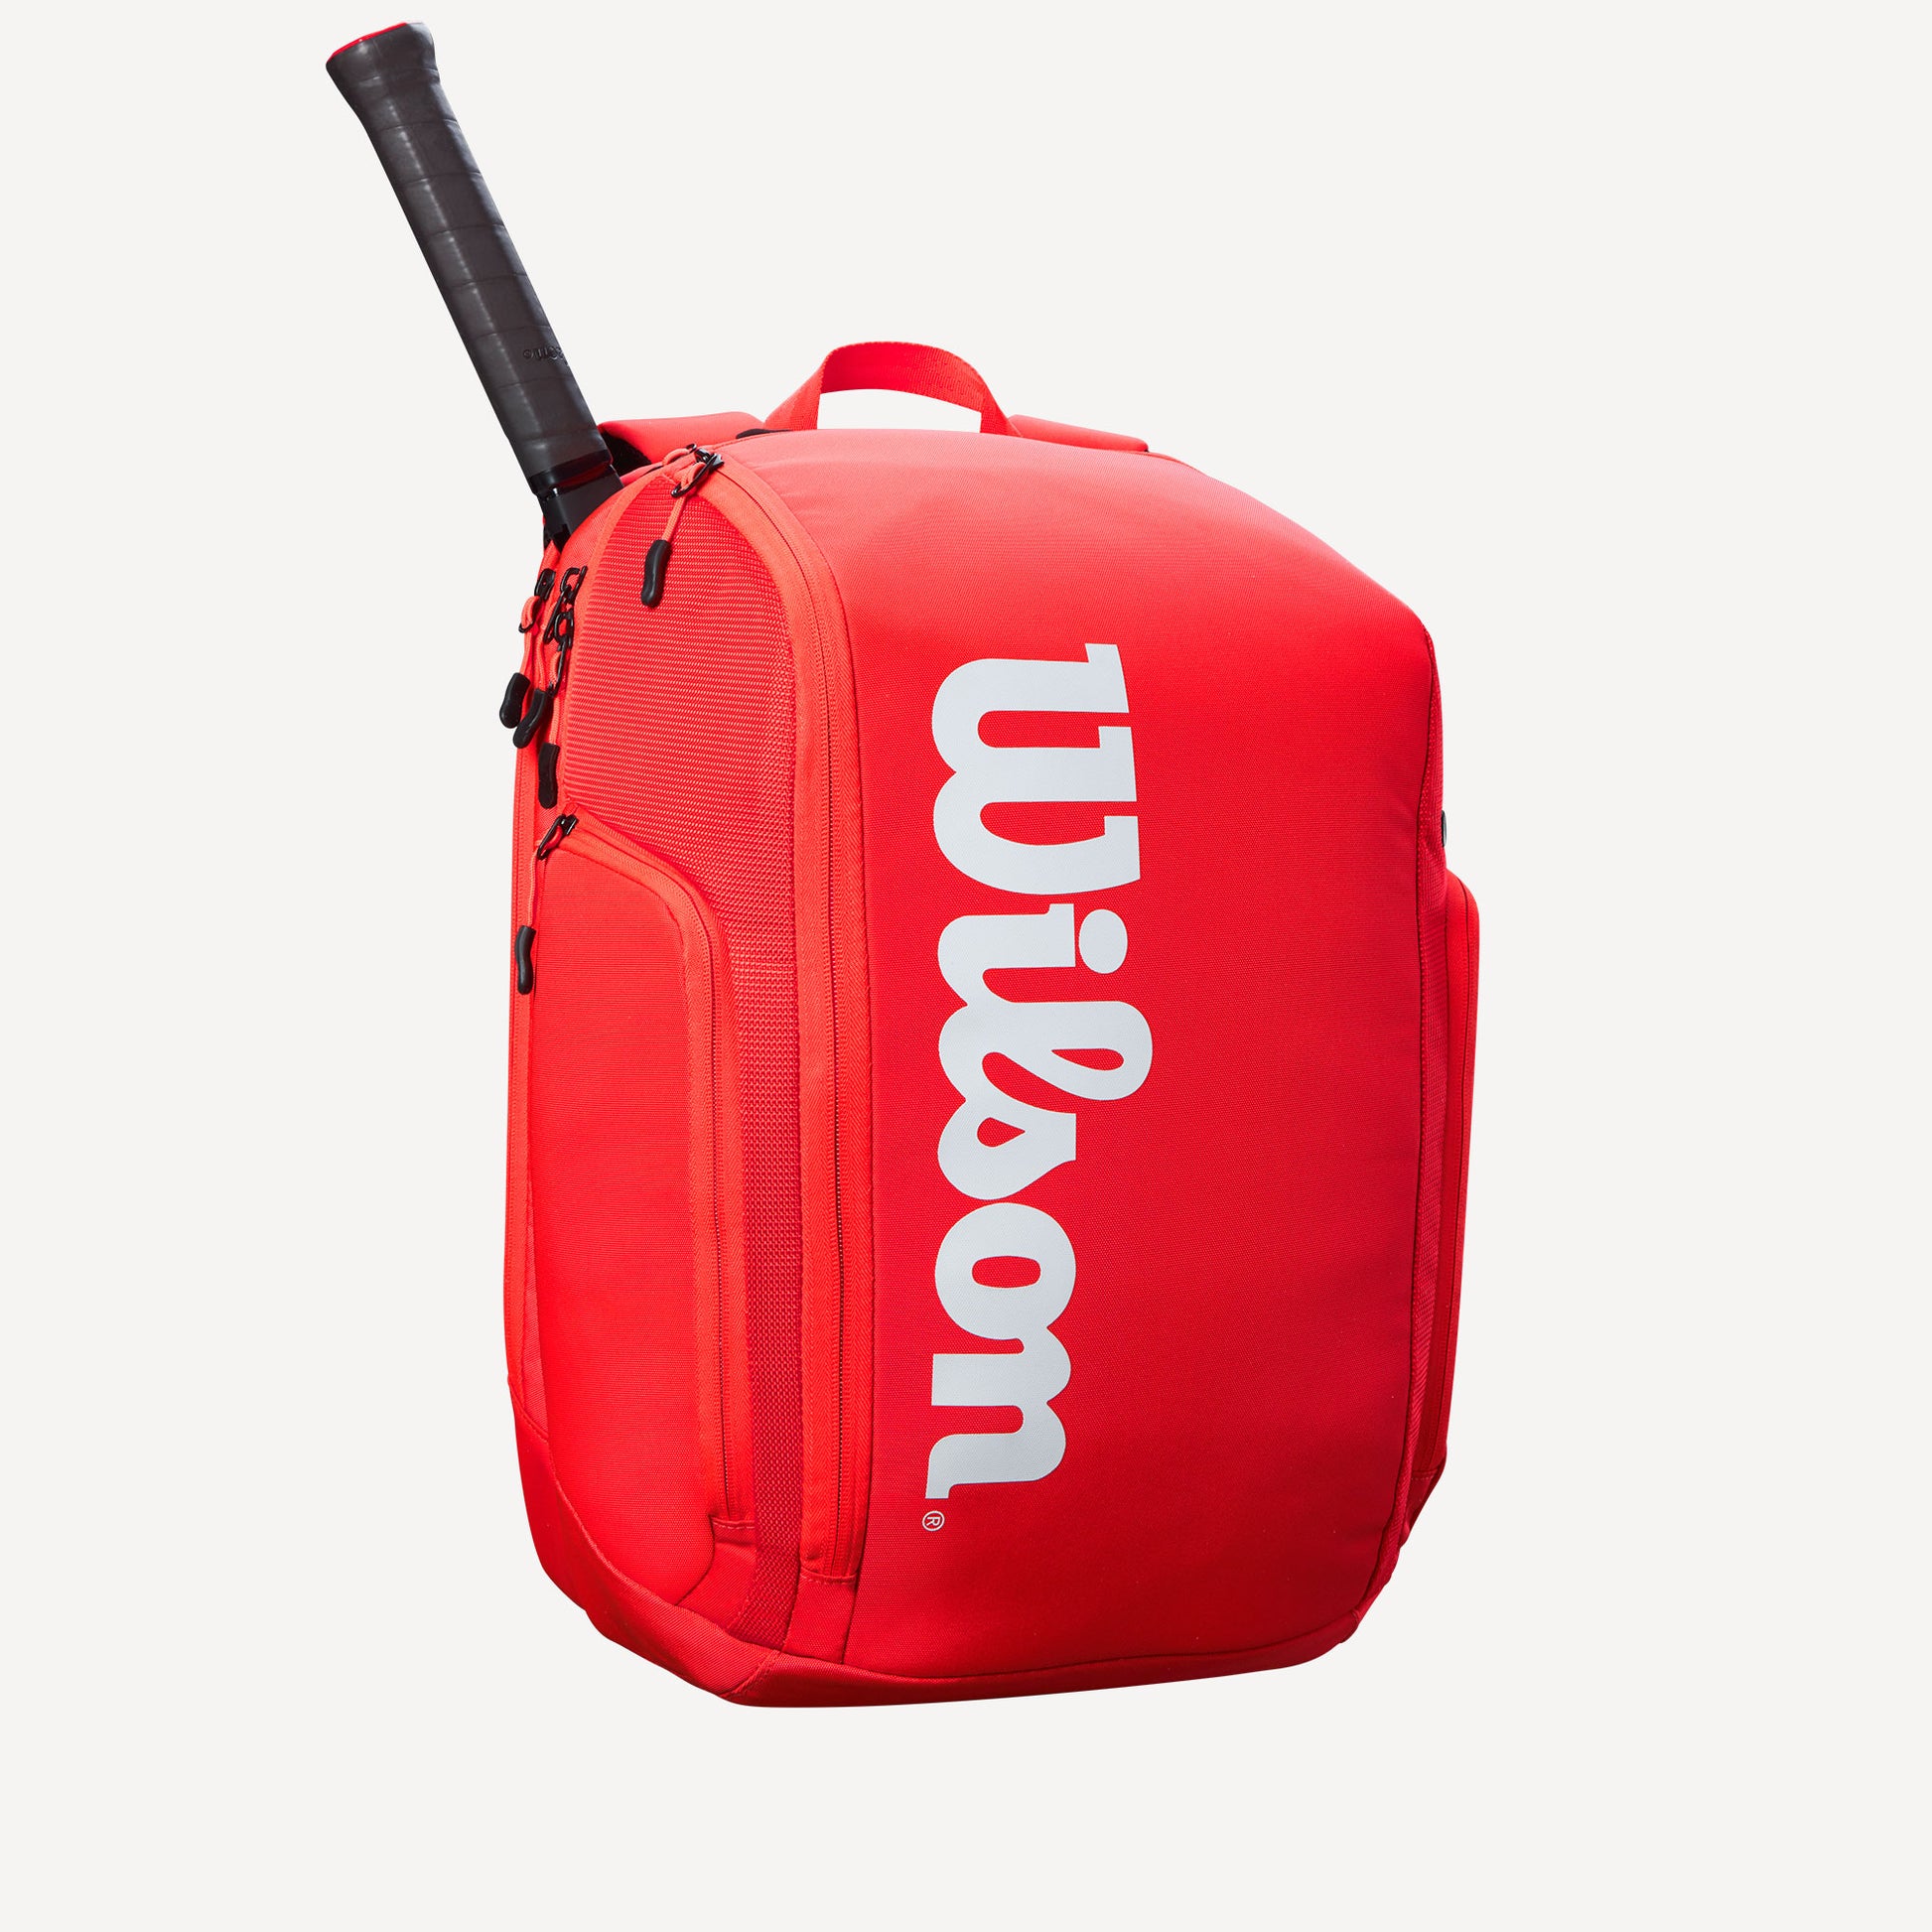 Wilson Super Tour Tennis Backpack Red (2)